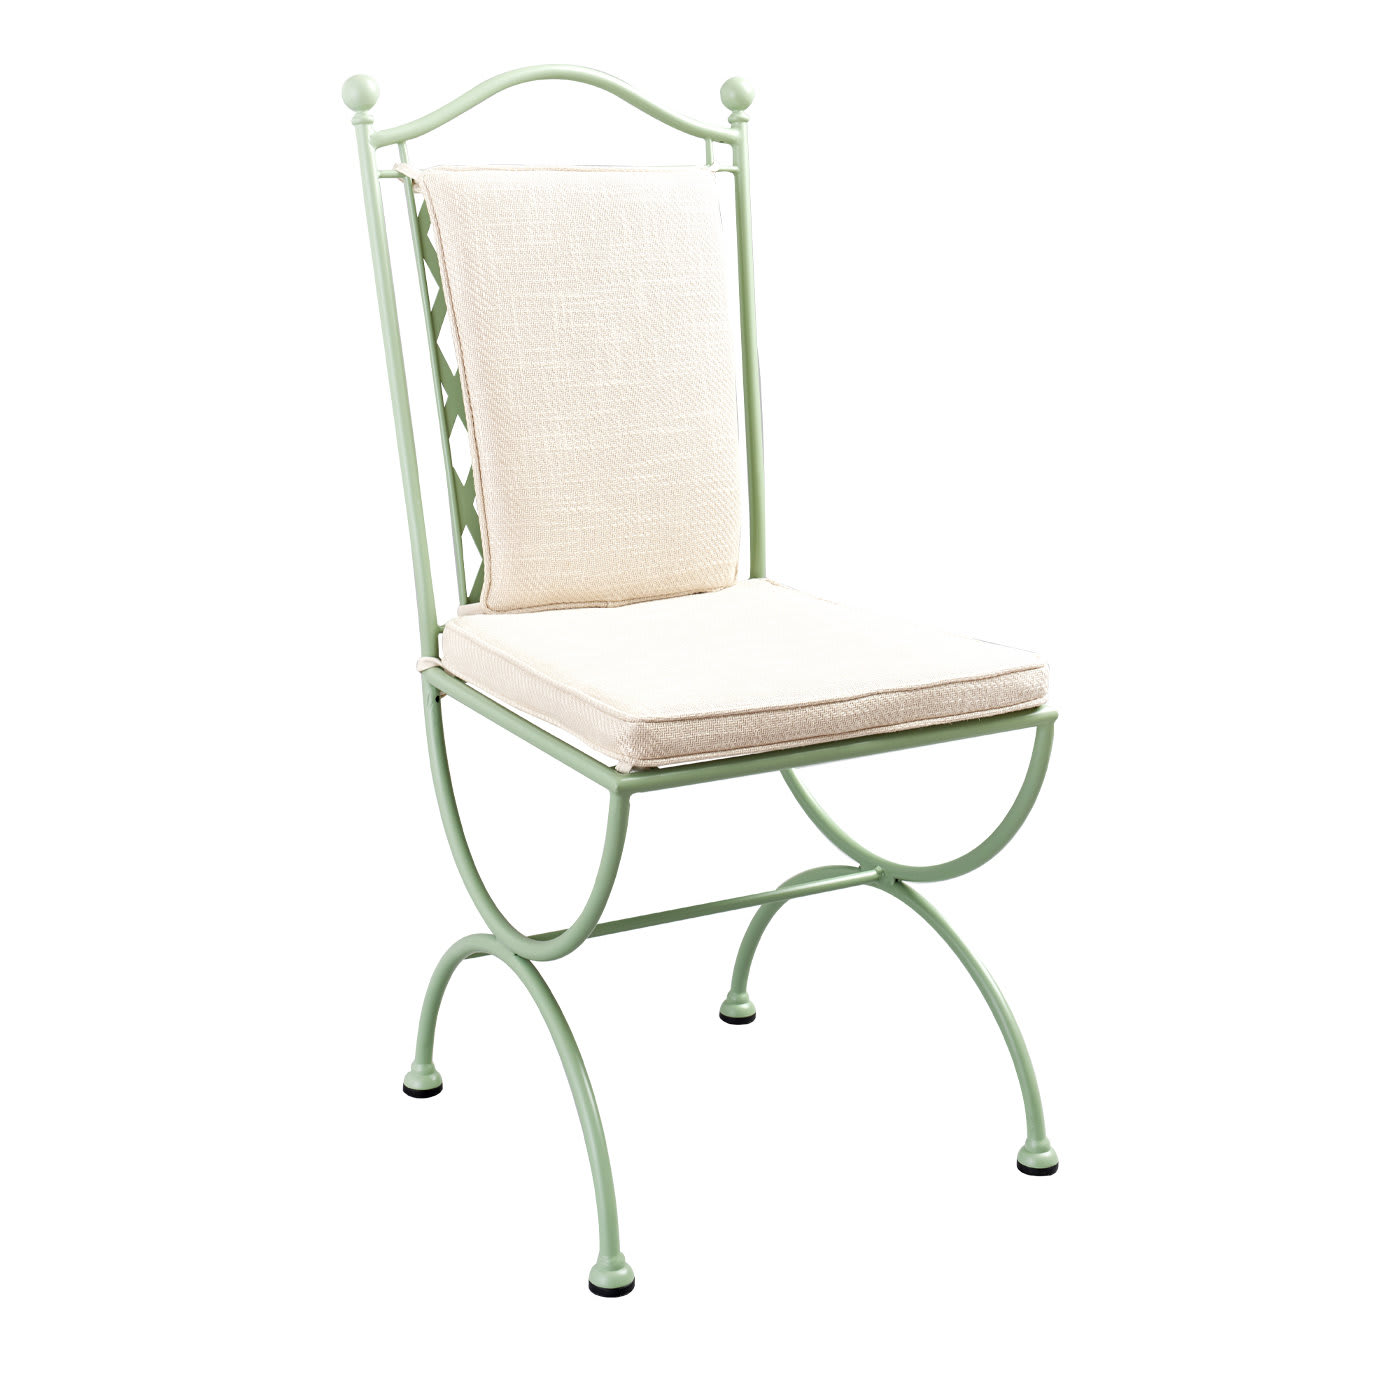 Rombi Outdoor Green Wrought Iron Chair - Officina Ciani